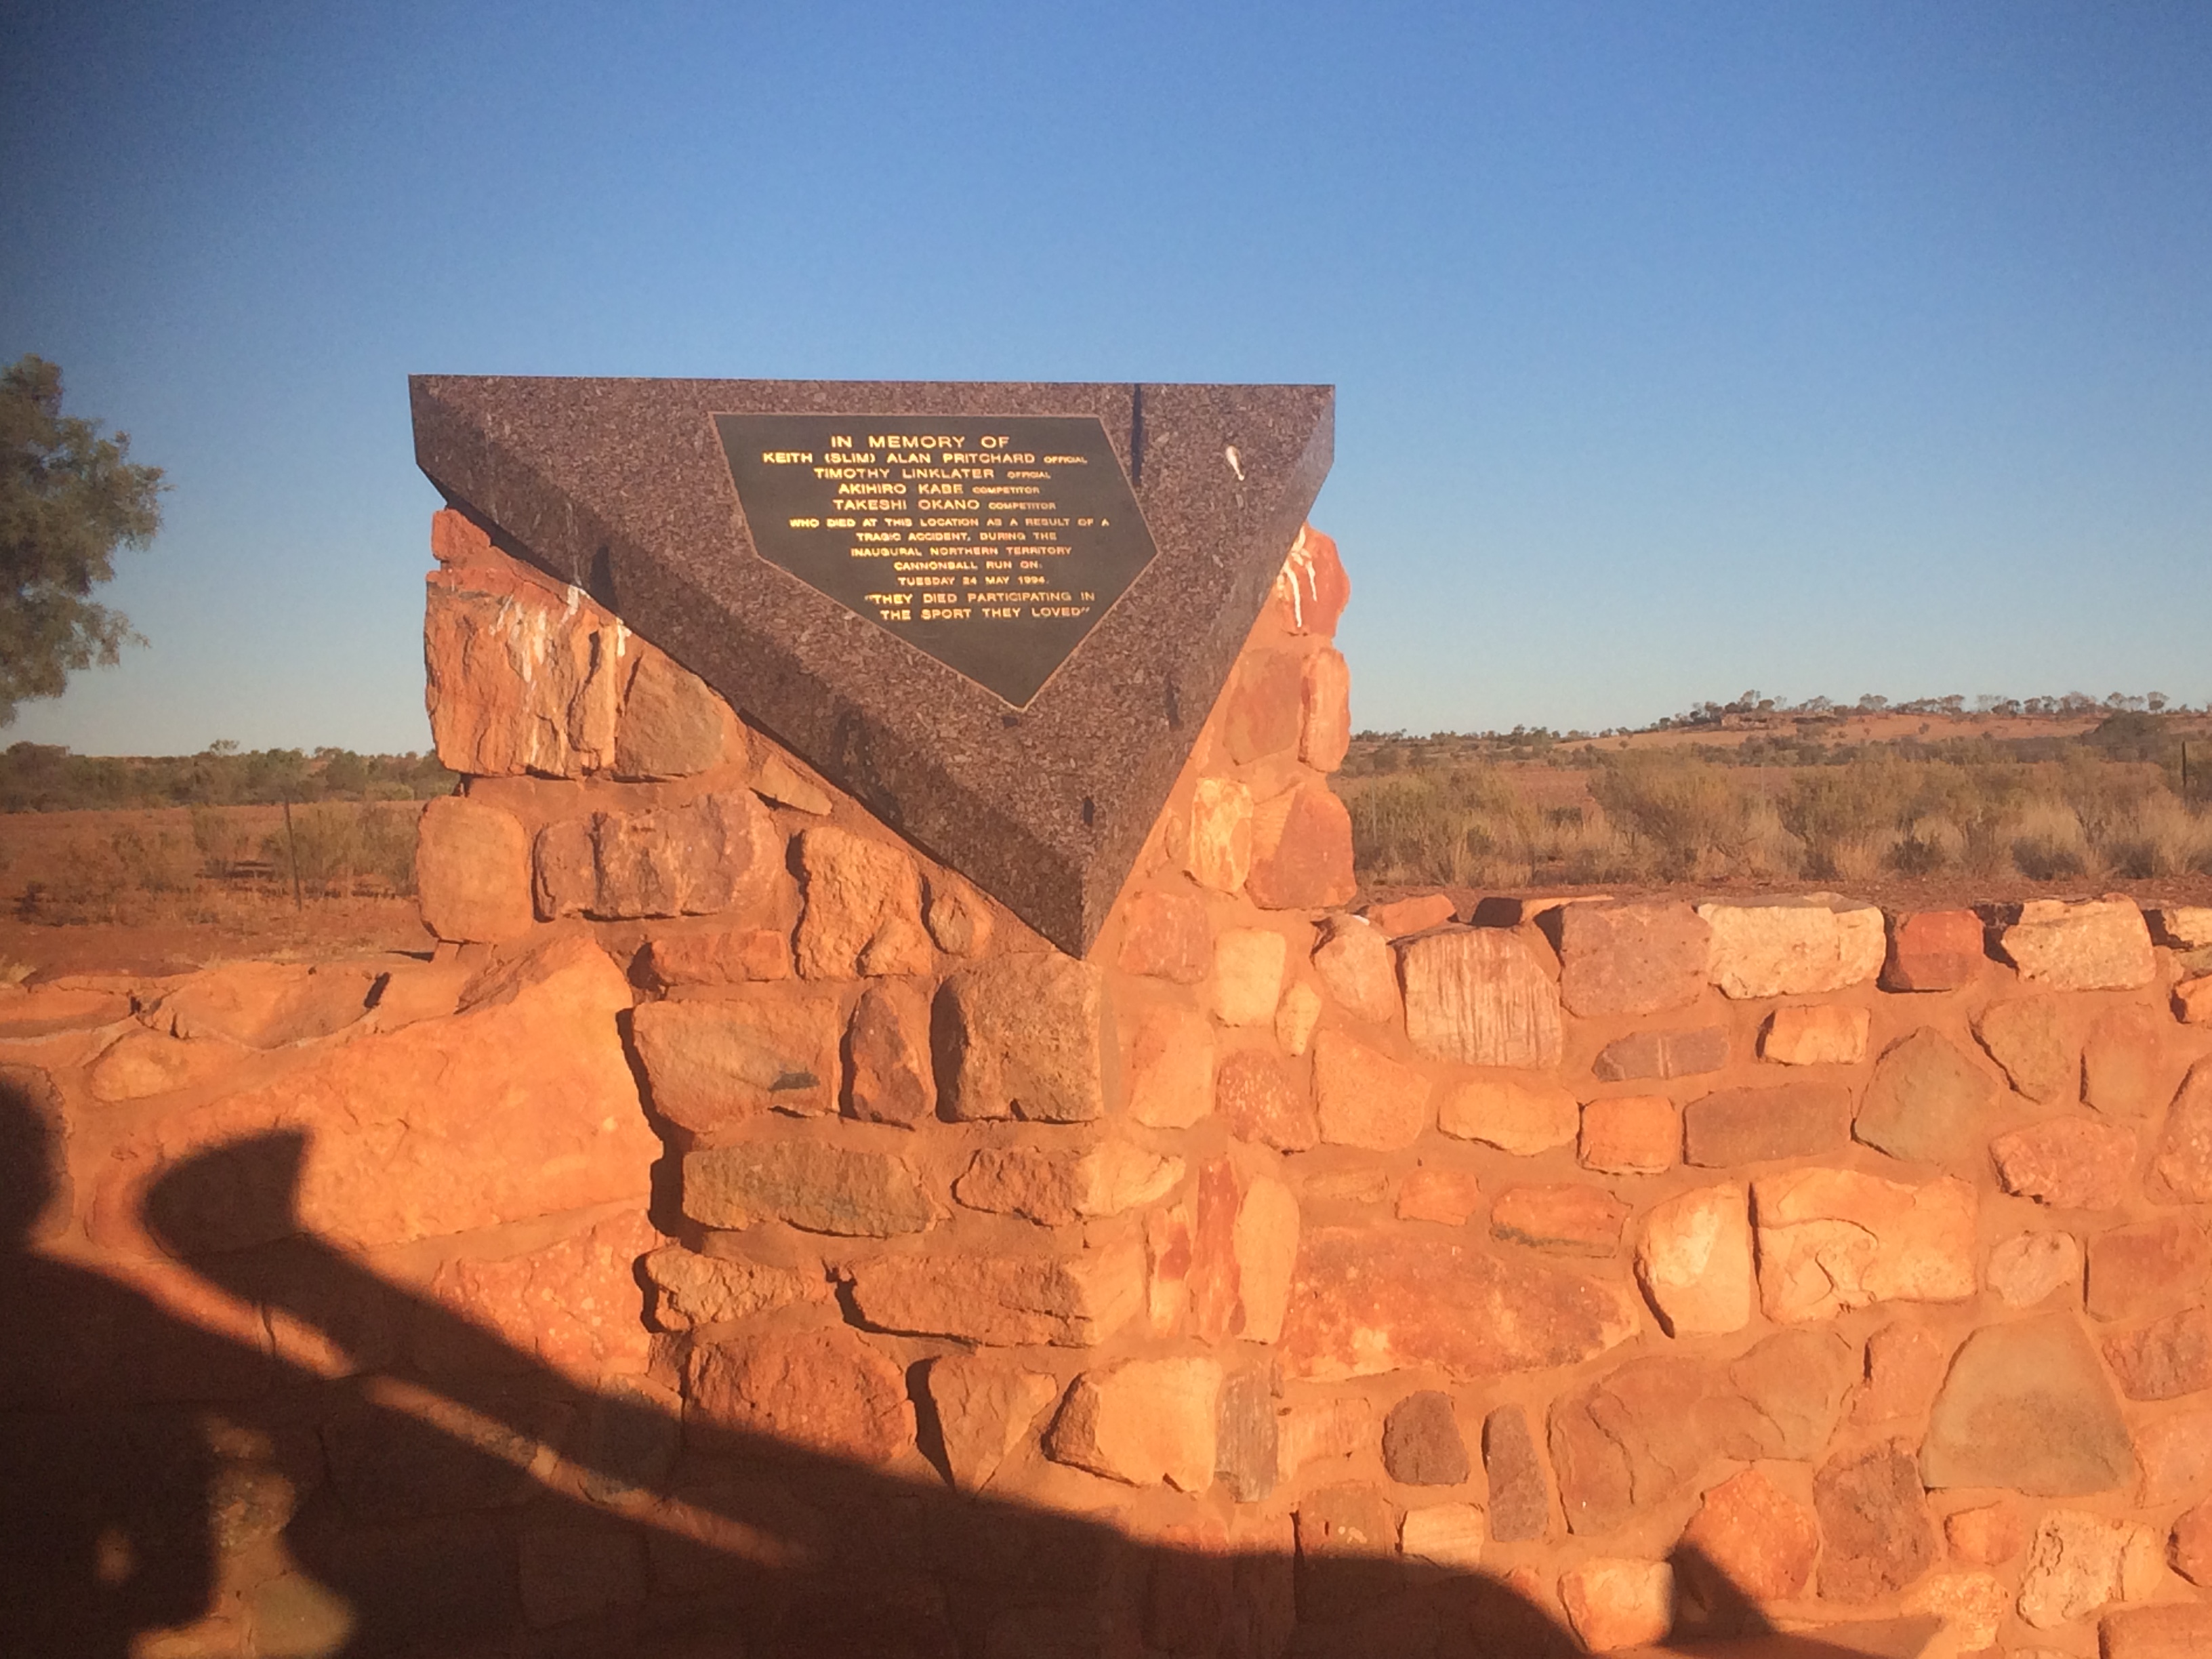 Red rock and mortar creating a fence with a raised corner which has a dark stone triangle on it. On the stone triangle is a plaque dedicated to those who lost their lives during the "Inaugural Cannonball Run"